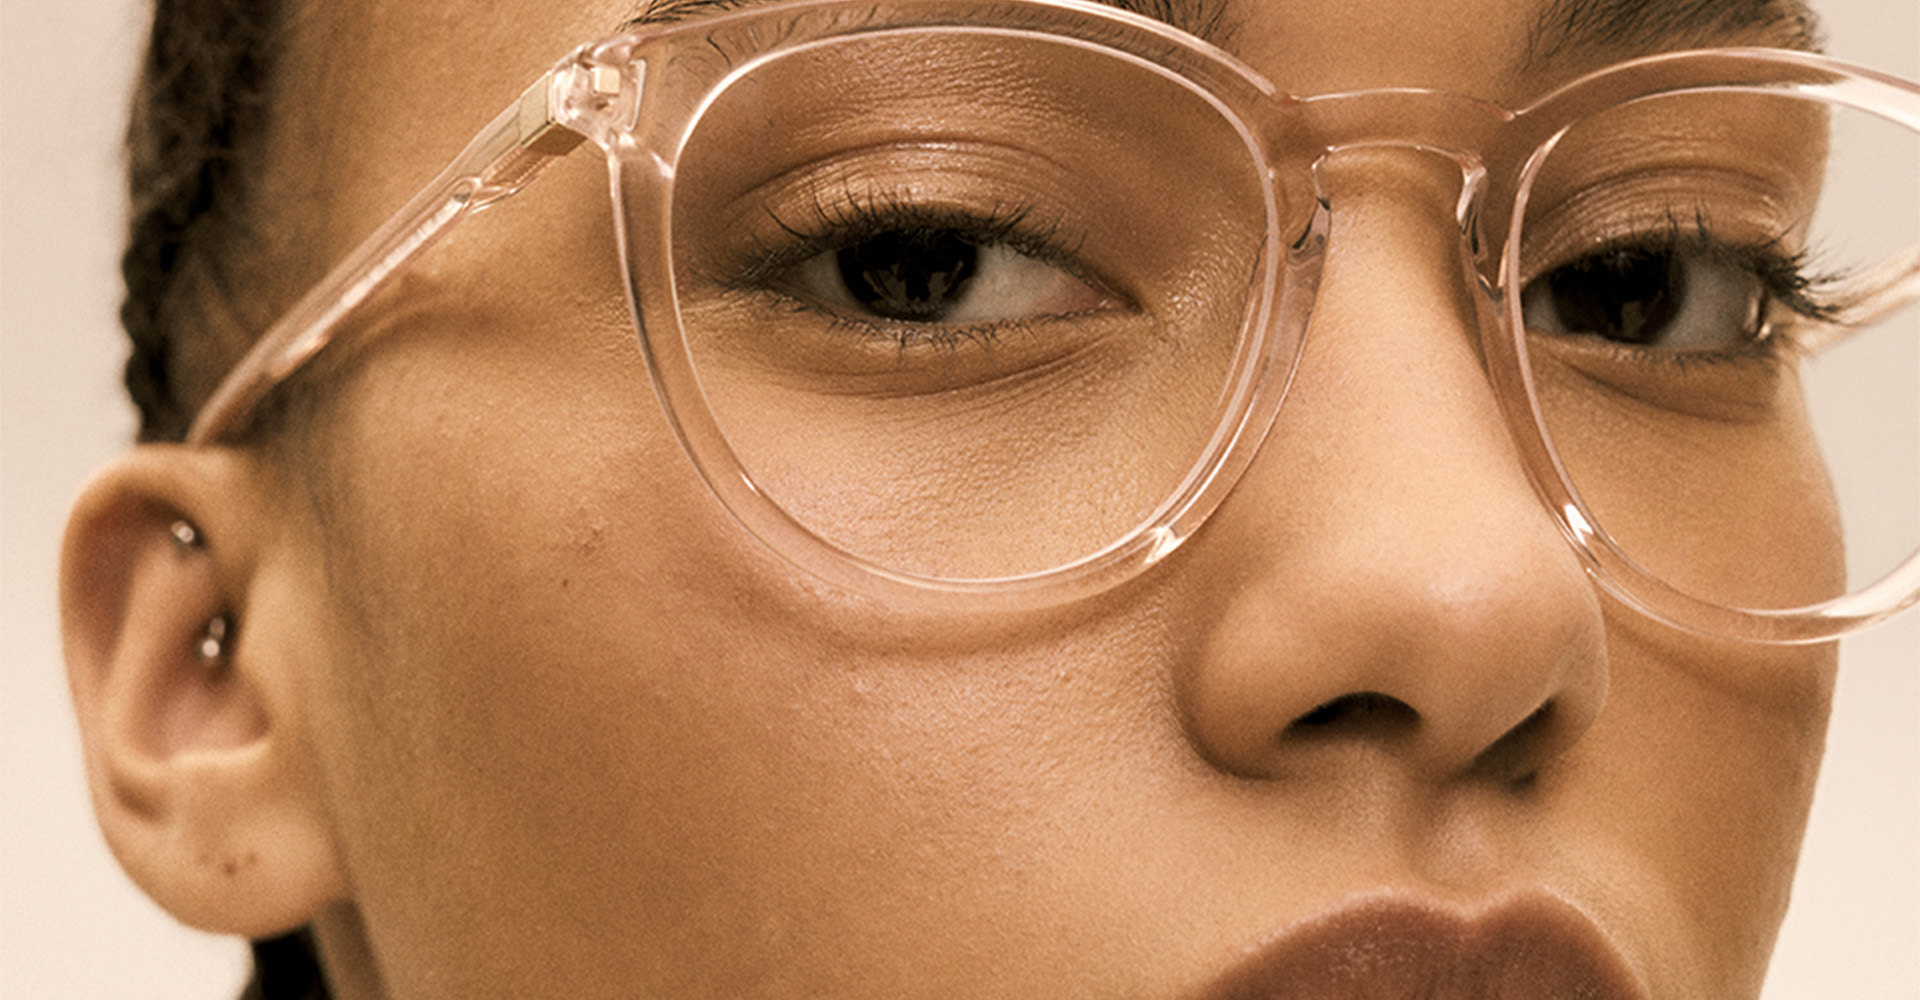 MYKITA ACETATE is a comprehensive acetate eyewear collection that perfectly captures MYKITA's responsible design ethos. All frames are made from Eastman Acetate Renew, a sustainable material.